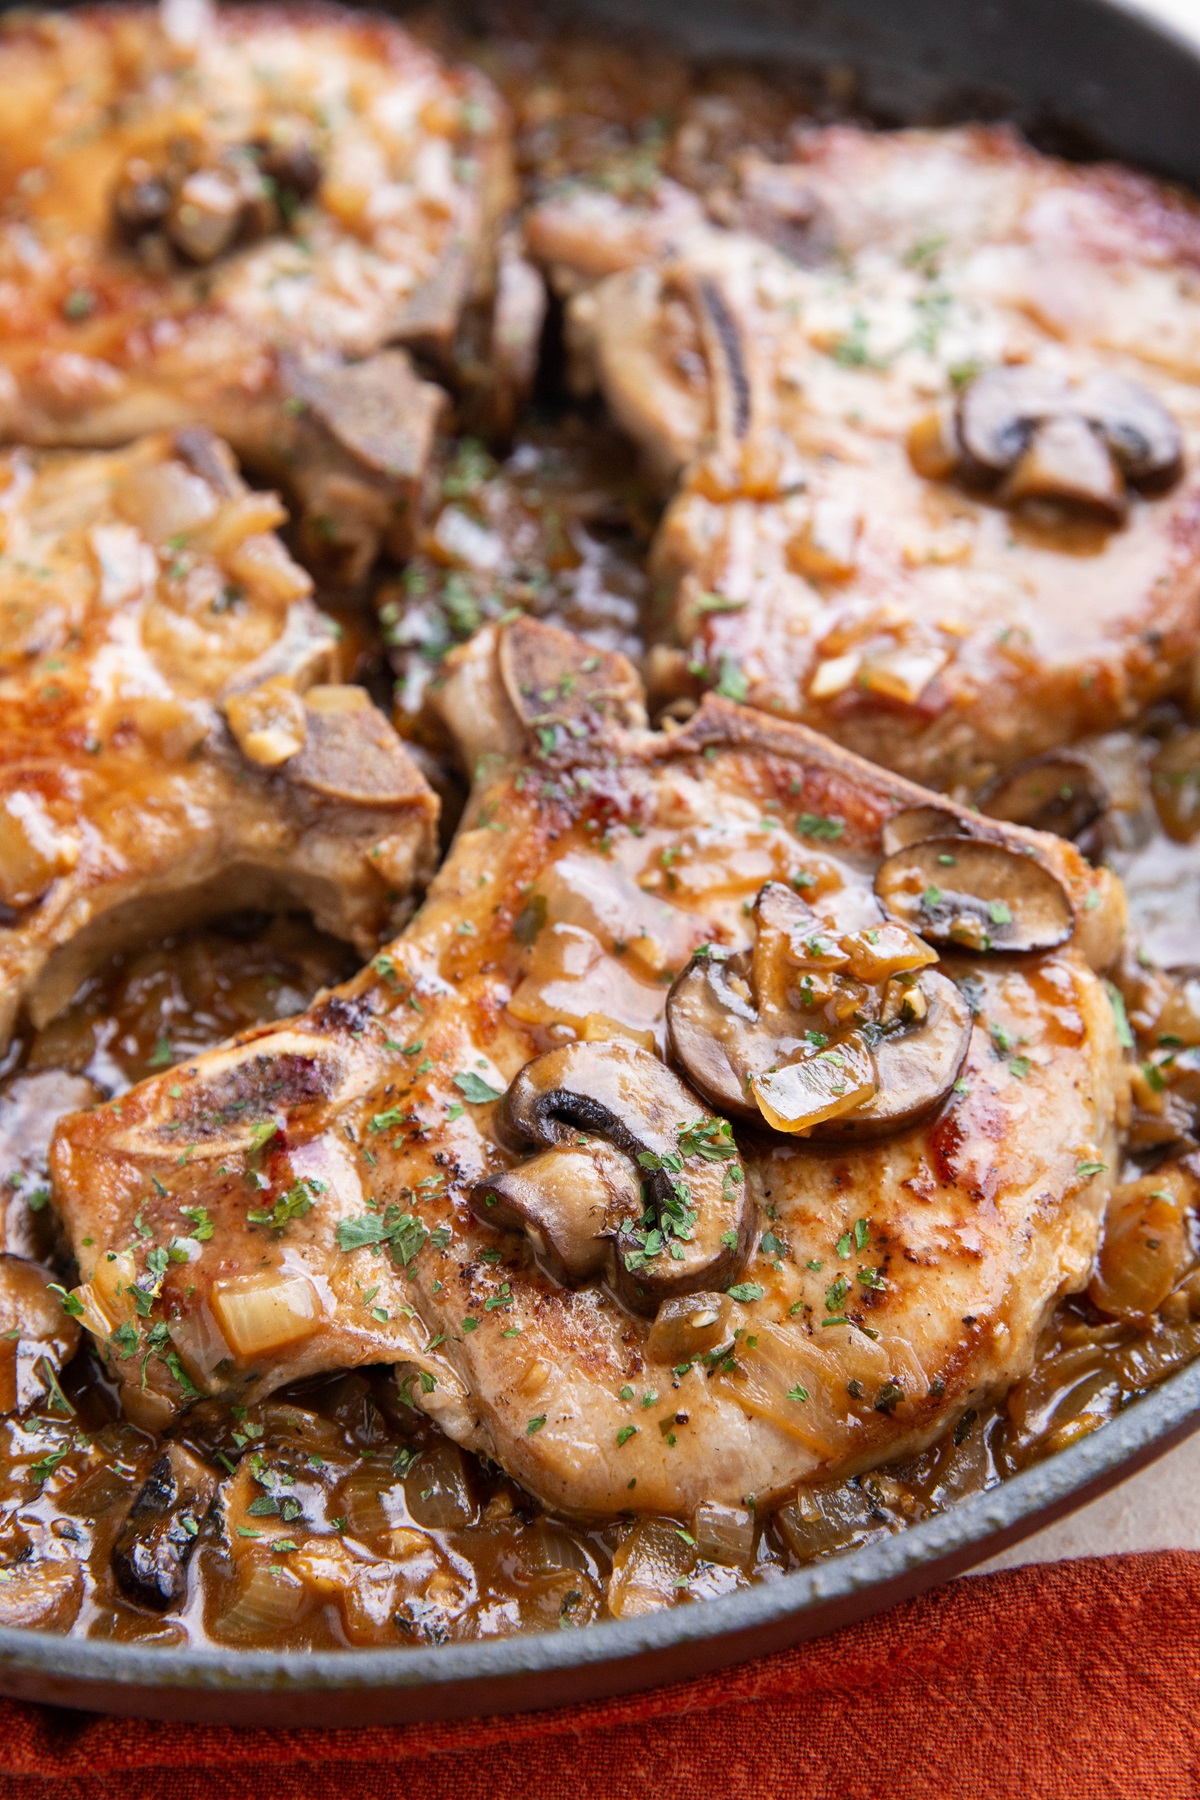 Seared pork chops in a skillet with mushroom gravy, ready to serve.